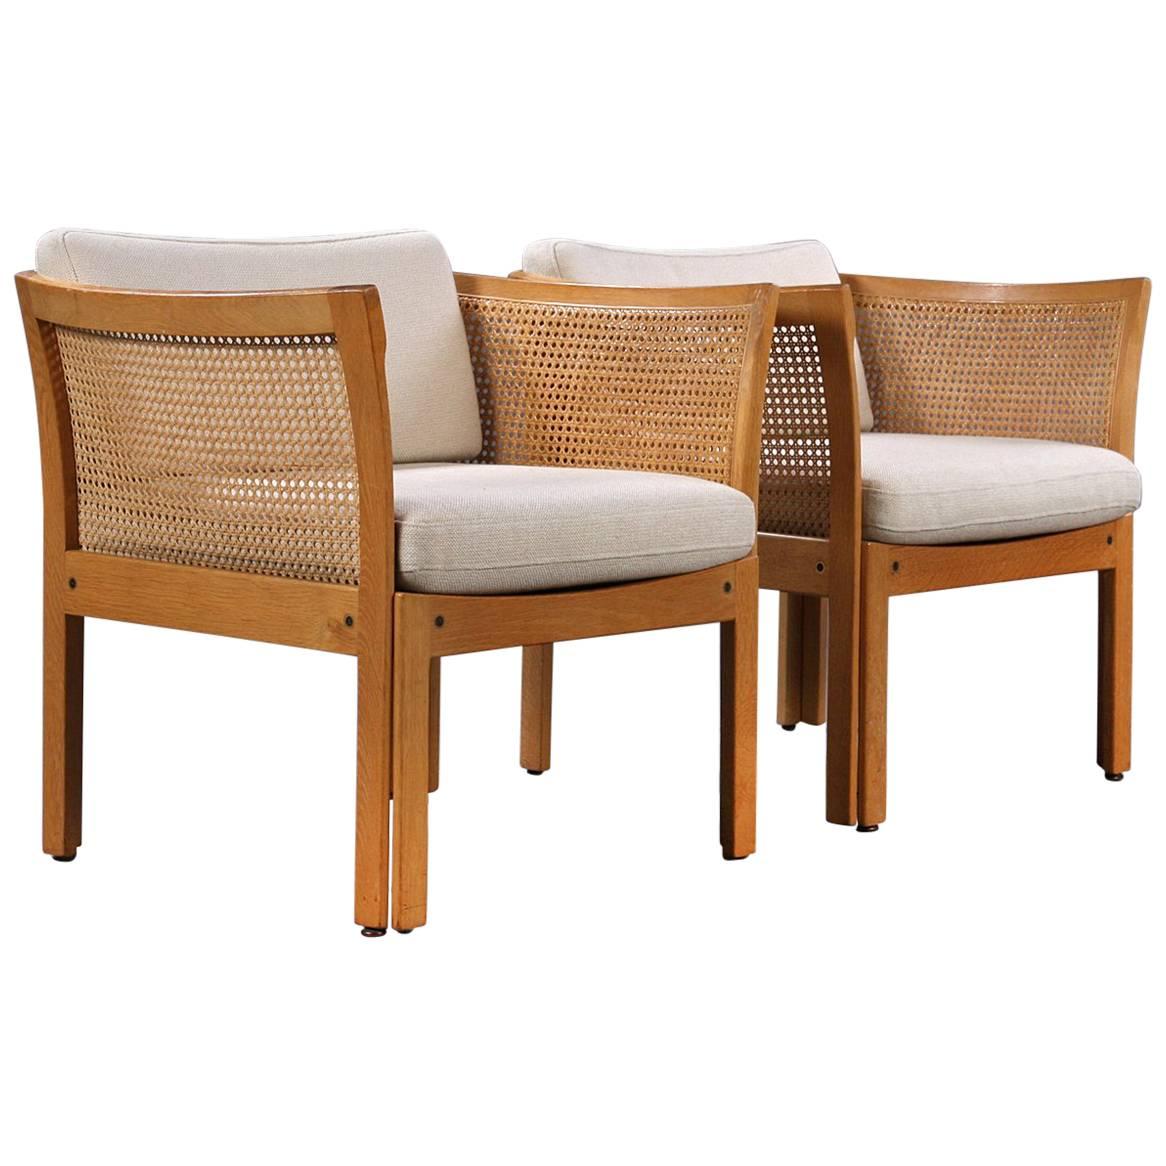 The plexus series was designed by Illum Wikkelsø in the 1960s and produced by CFC Silkeborg in Denmark.

This set of plexus easy chairs are in good condition and features a frame in oak and fabric upholstery.

The Plexus series is designed to be